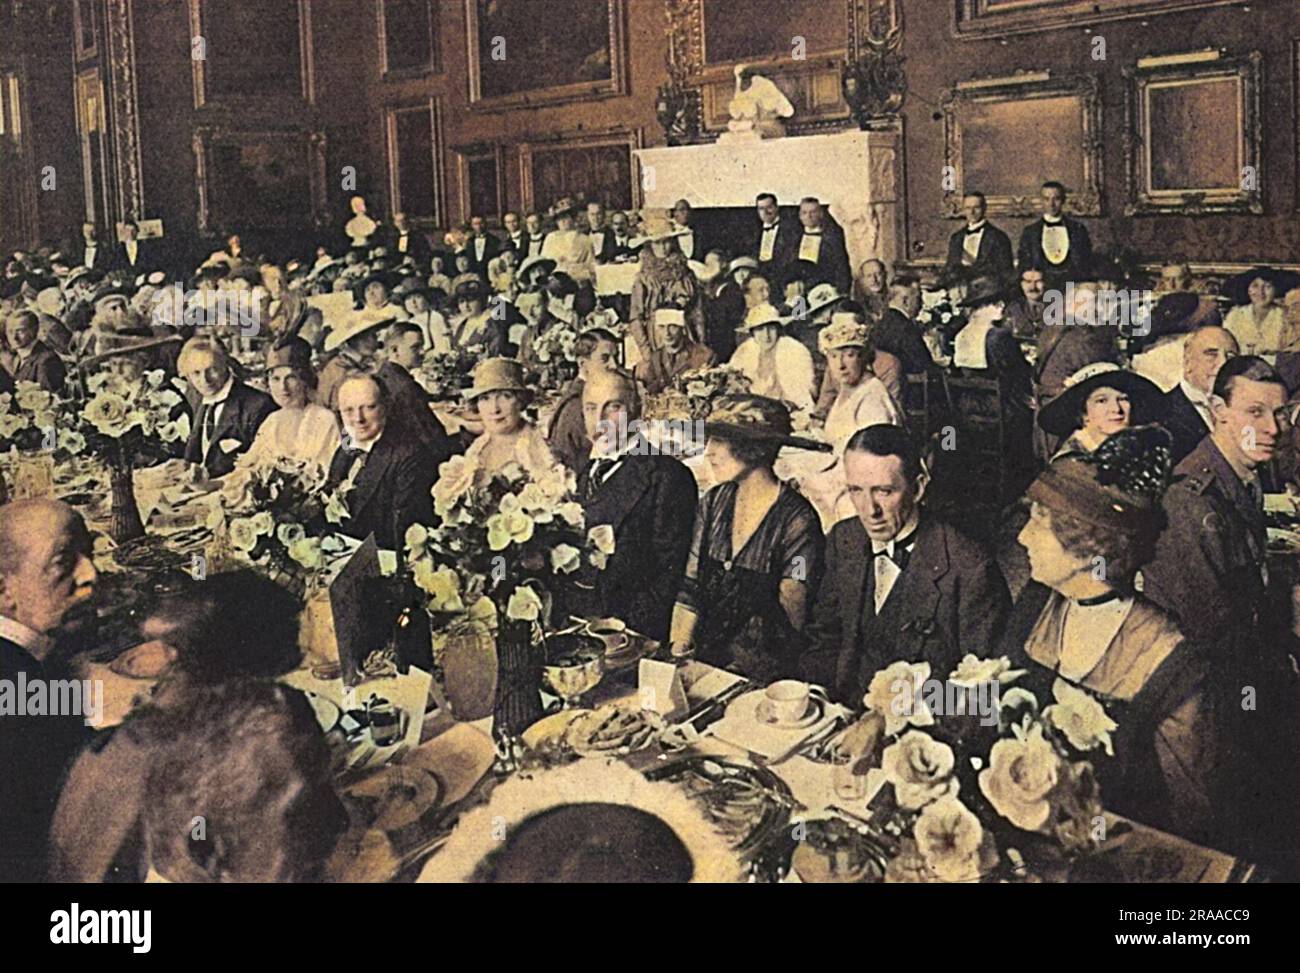 The Souvenir Luncheon at Grosvenor House in aid of the Three Arts War Fund, which was followed by a garden fete.  The Duke of Westminster lent his house for the occasion which was attended by Queen Alexandra and a great deal of society.  Photograph shows a view of one of the luncheon rooms and the table of Lady Paget.  Amongst the well-known people are Mr Winston Churchill, who is sitting alongside Lady Paget and Mrs (Hazel) Lavery and Mr Gerald de Maurier on the right of Mrs Astor.     Date: 1916 Stock Photo